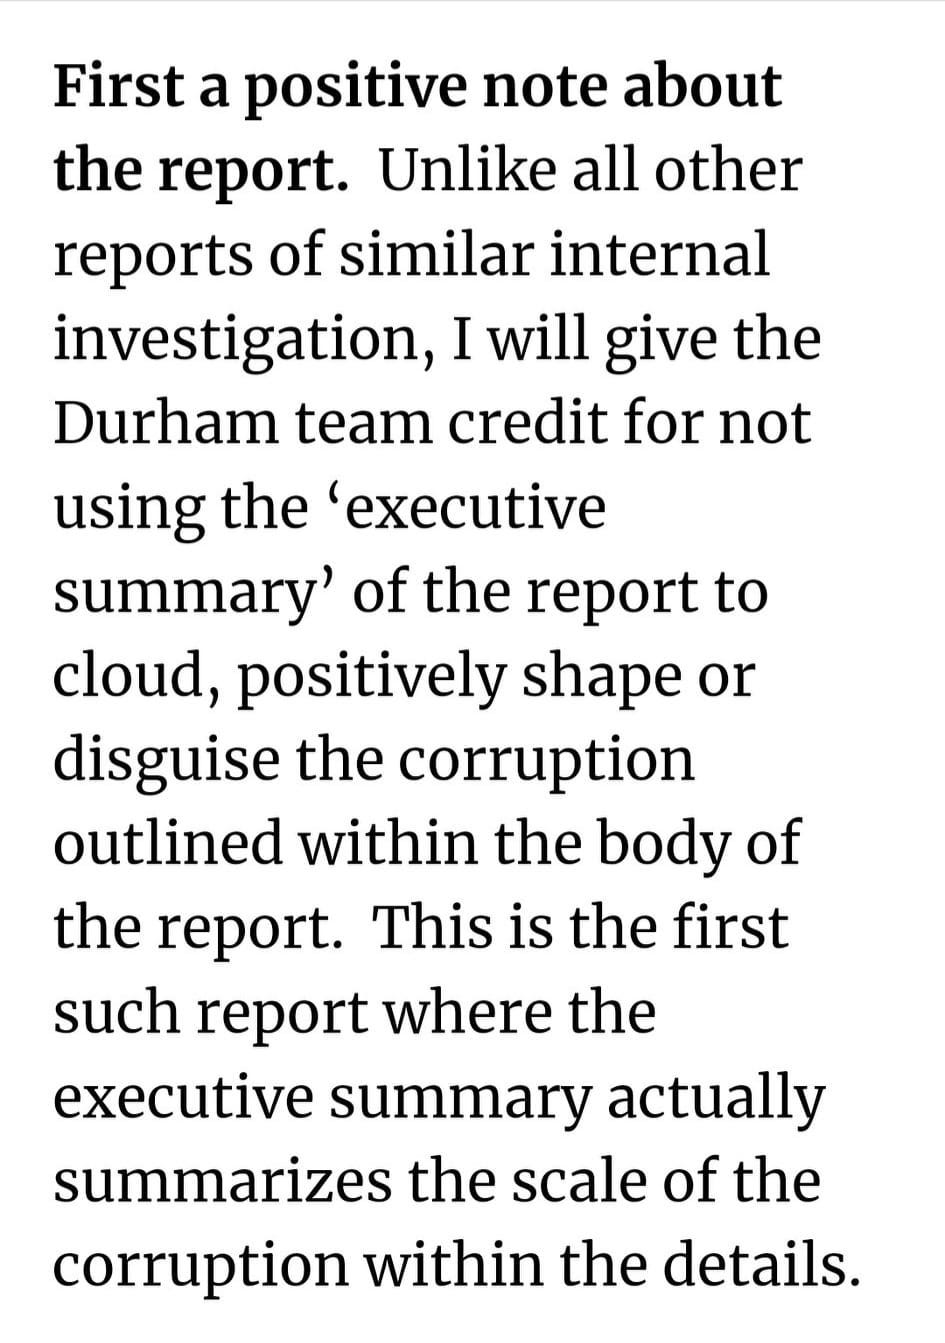 May be an image of text that says 'First a positive note about the report. Unlike all other reports of similar internal investigation, I will give the Durham team credit for not using the 'executive summary' of the report to cloud, positively shape or disguise the corruption outlined within the body of the report. This is the first such report where the executive summary actually summarizes the scale of the corruption within the details.'